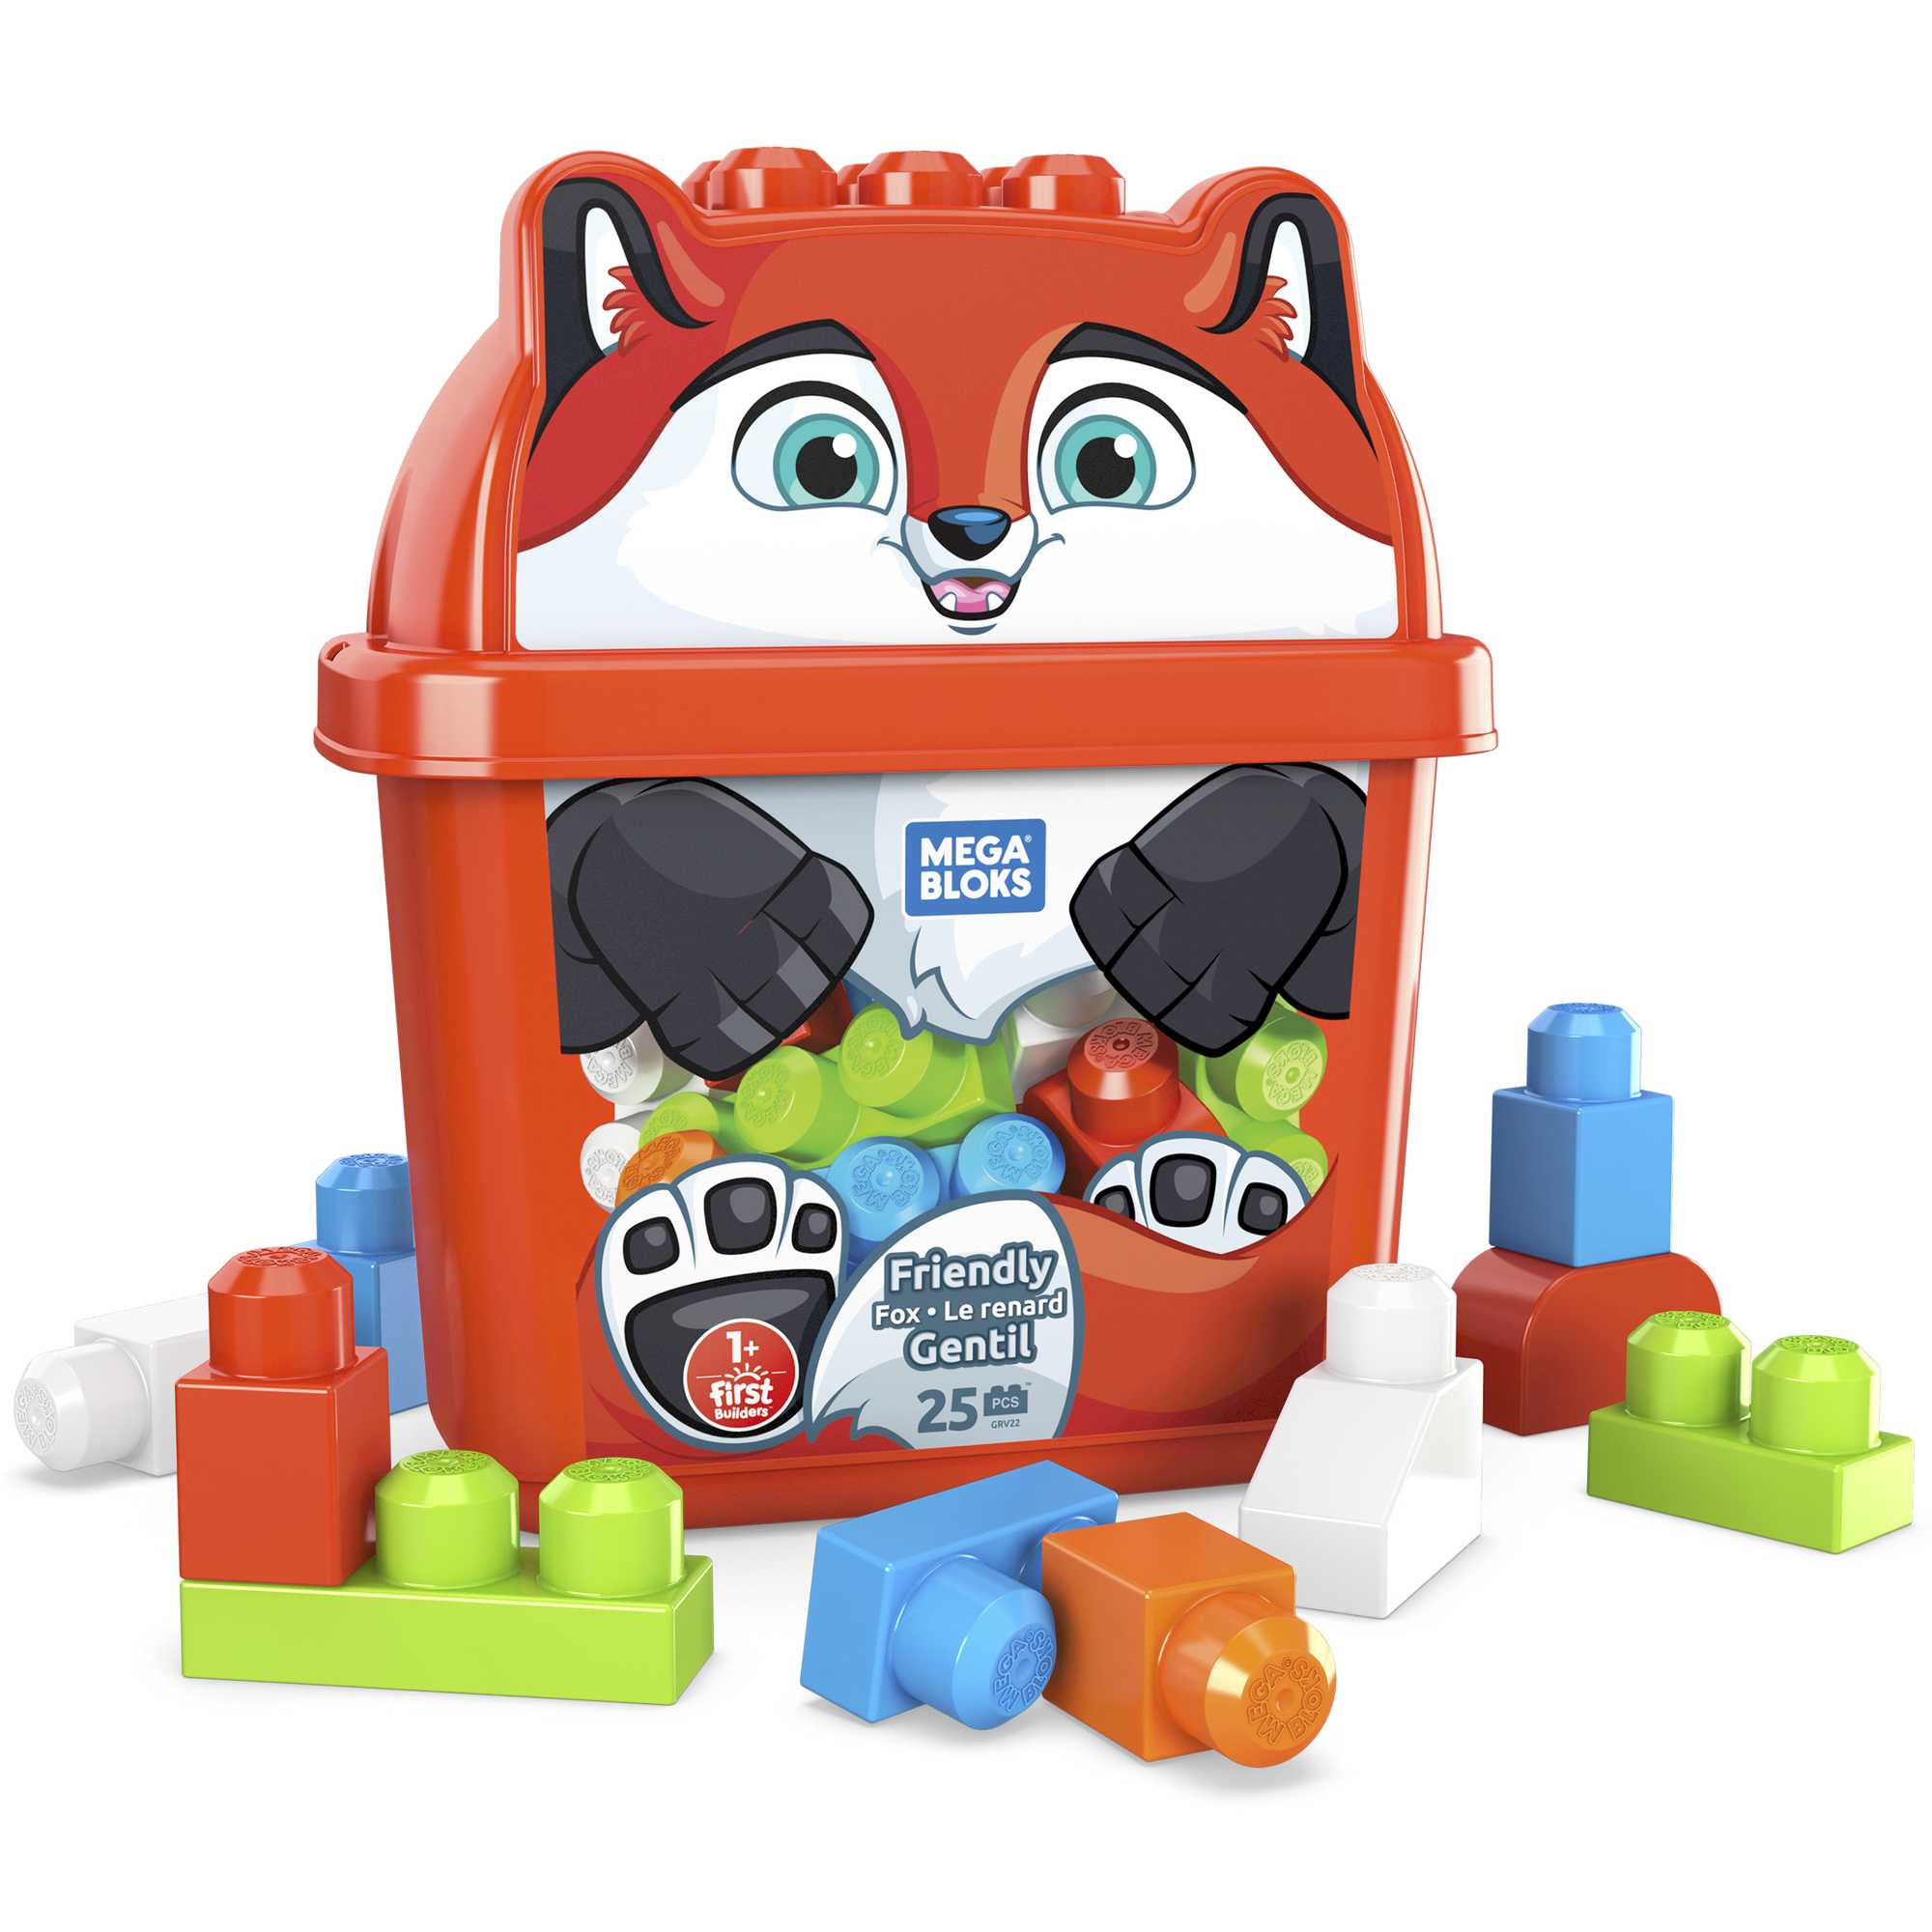 MEGA BLOKS First Builders Friendly Fox for Toddlers, 25 Pieces - image 1 of 7